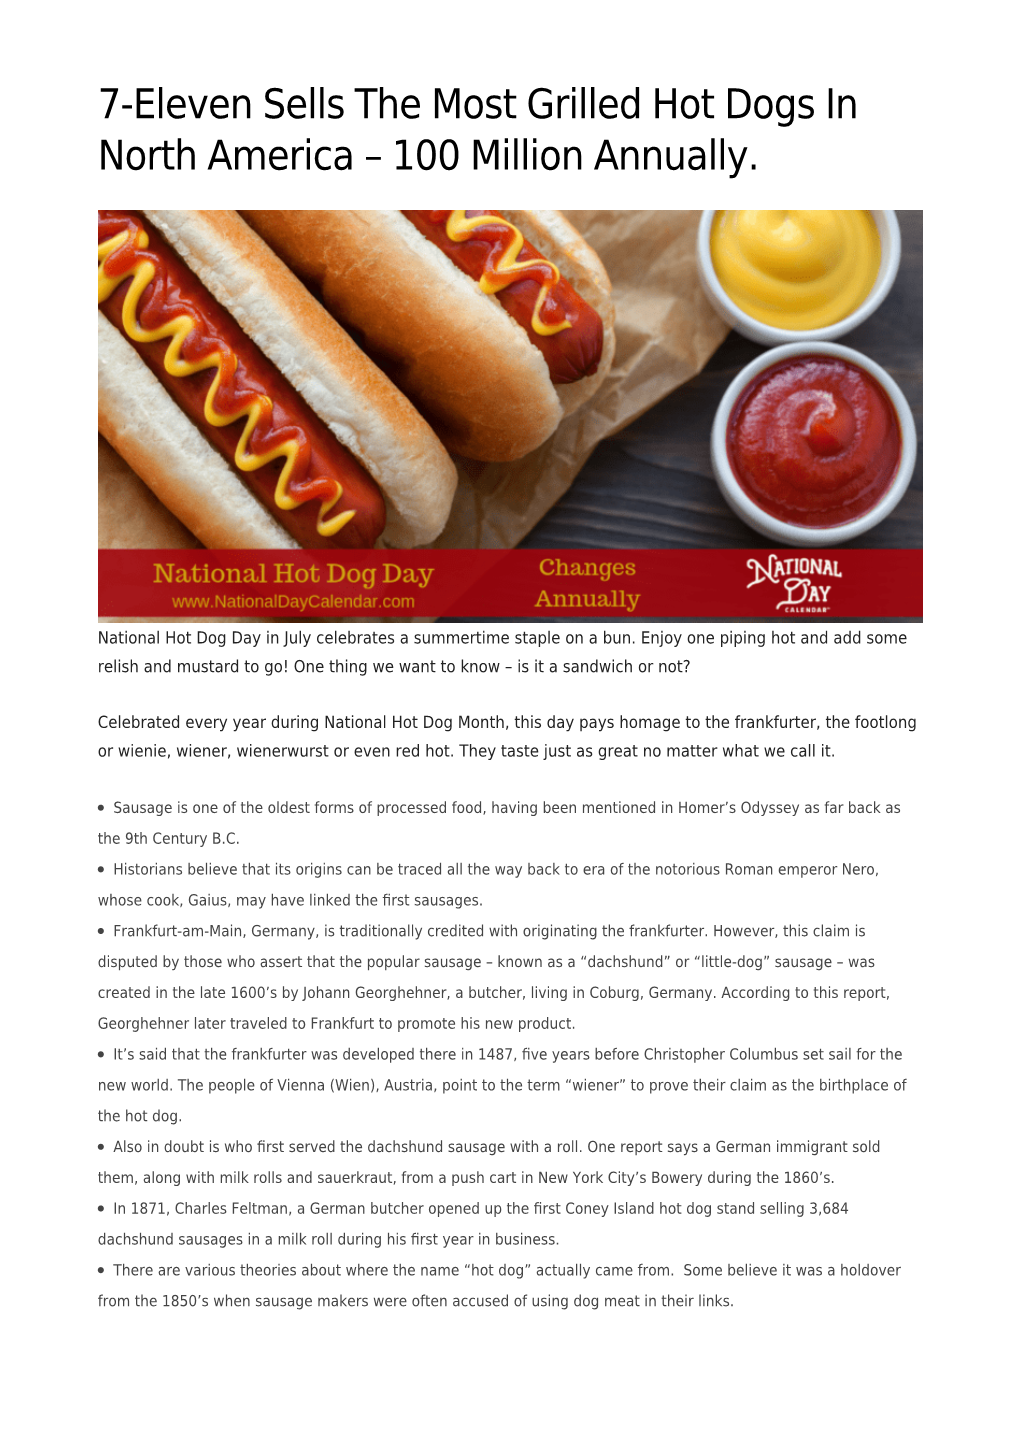 7-Eleven Sells the Most Grilled Hot Dogs in North America – 100 Million Annually